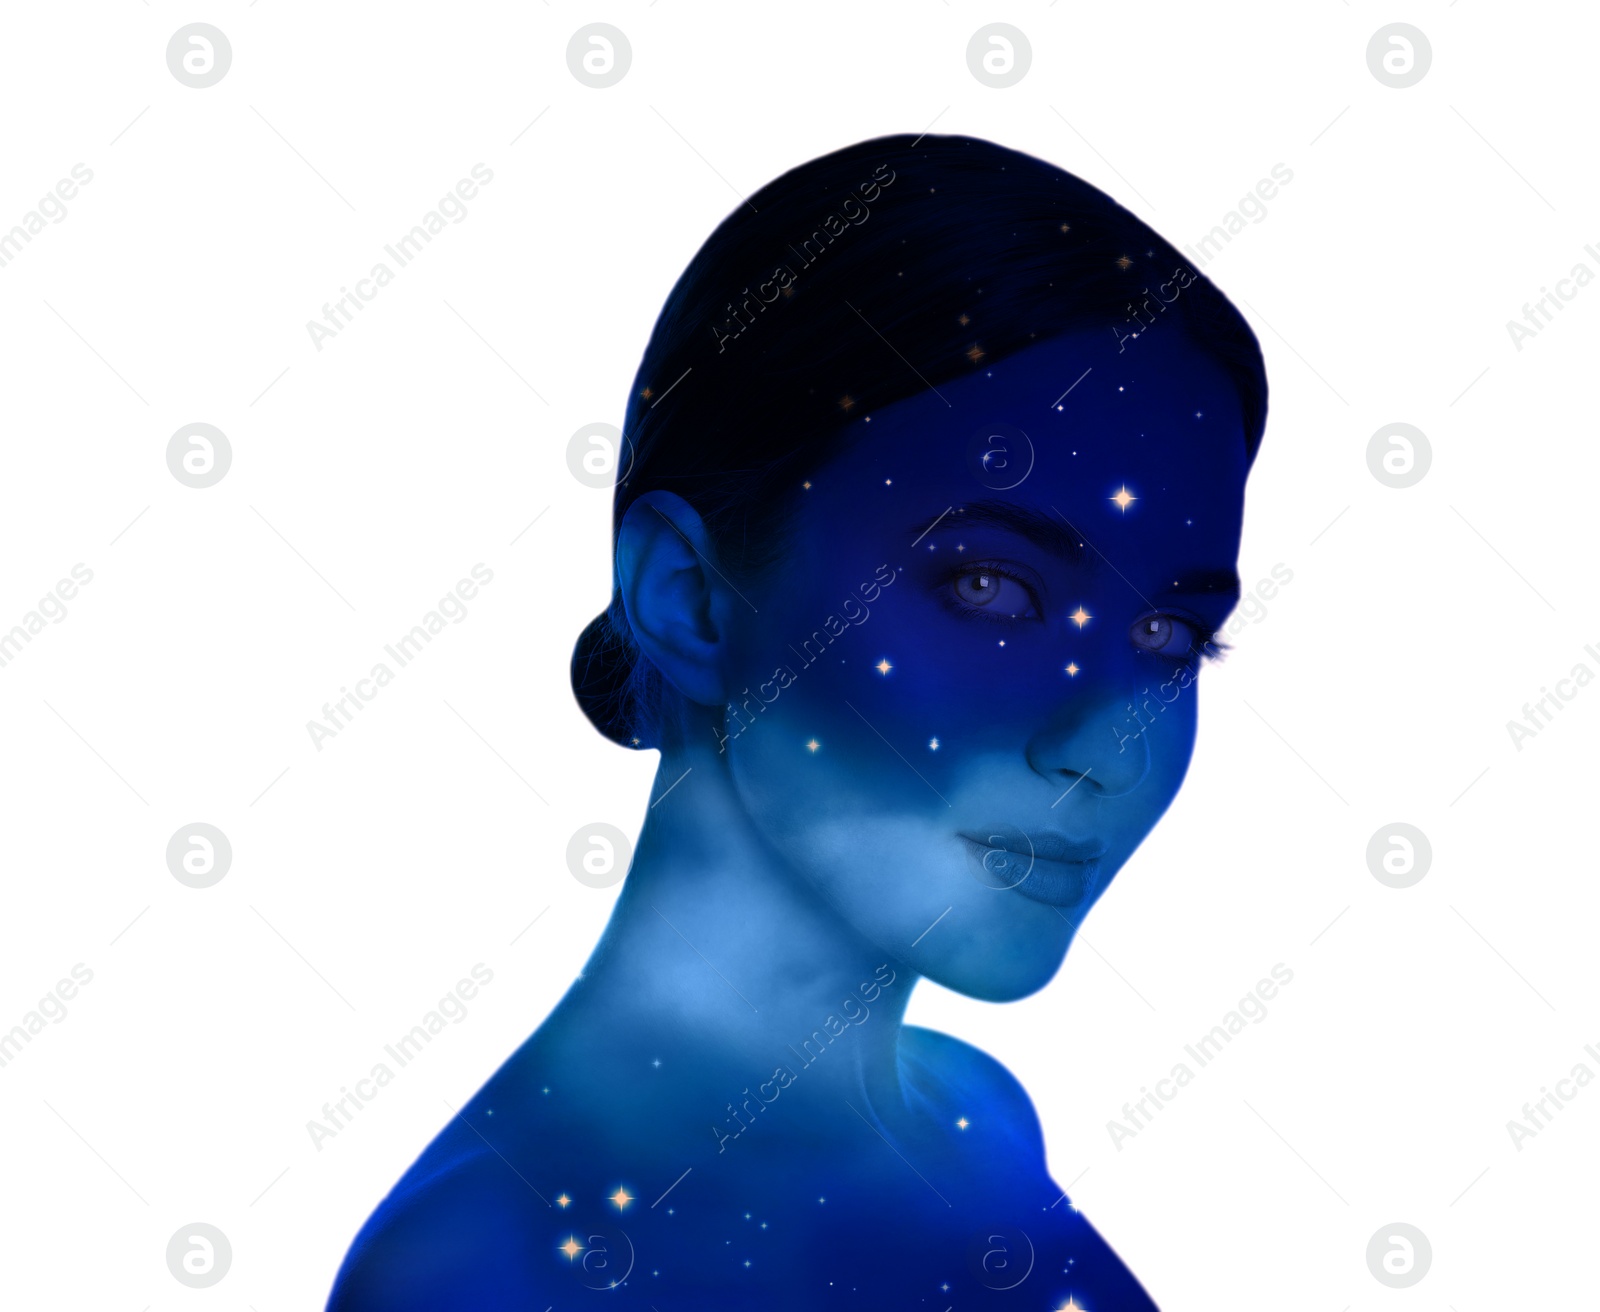 Image of Universe hidden in human, mindfulness, imagination, art, creativity, inner power concepts. Silhouette of woman and starry sky or galaxy on white background, double exposure